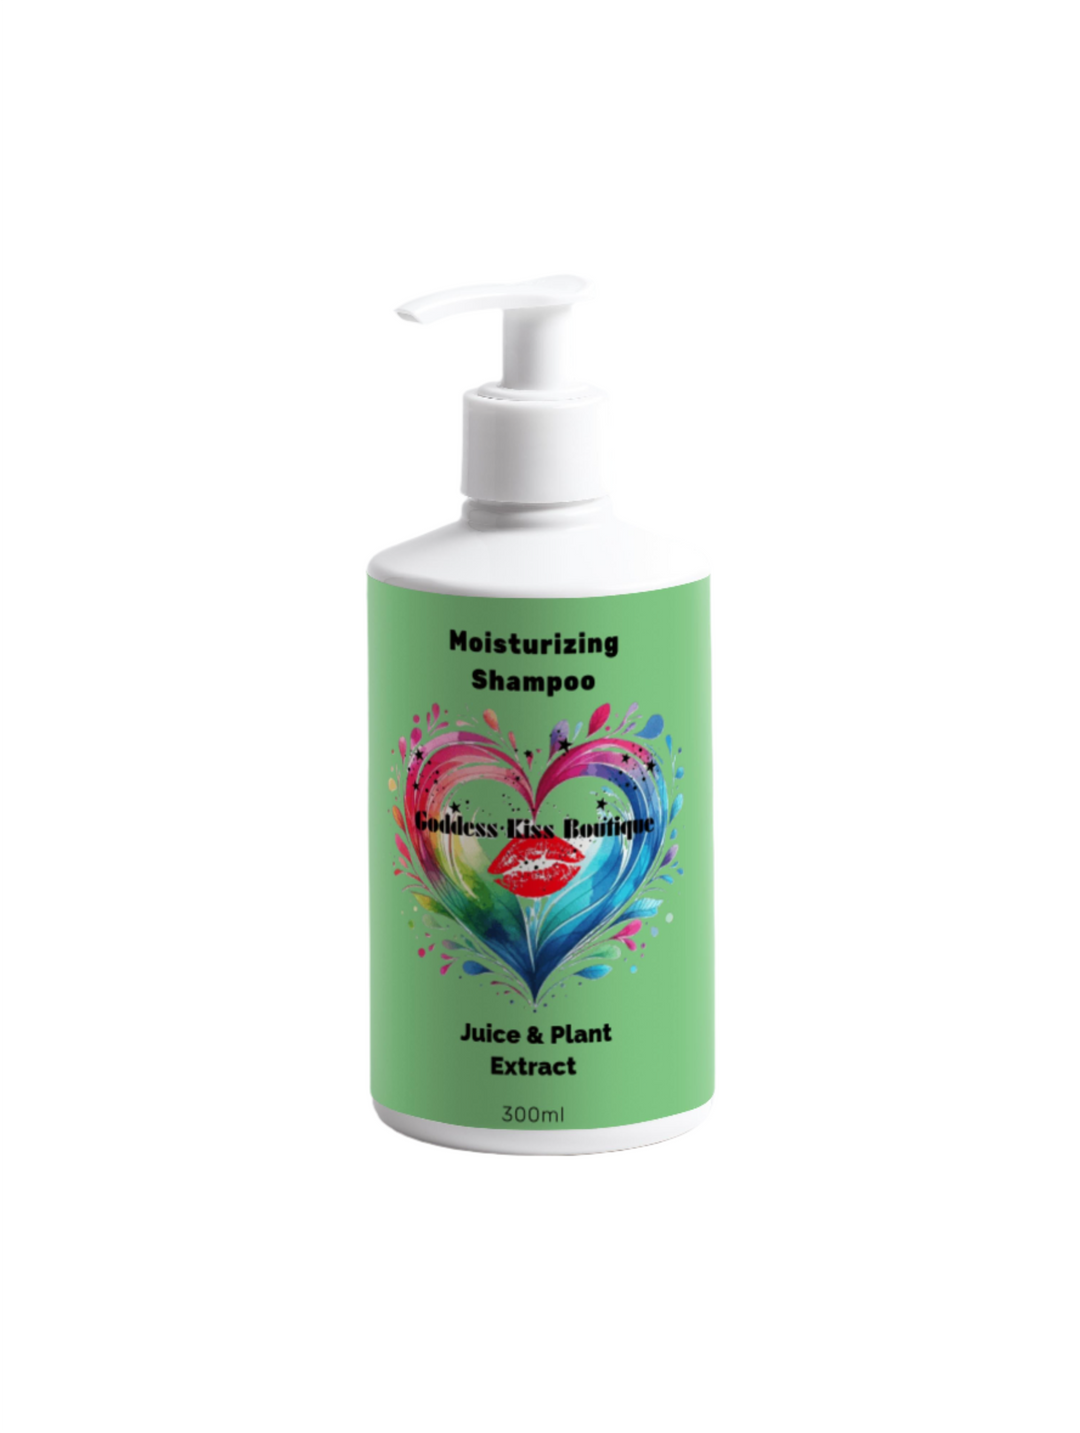 Moisturizing Shampoo with Aloe Juice & Plant Extract for Smooth, Glossy Hair